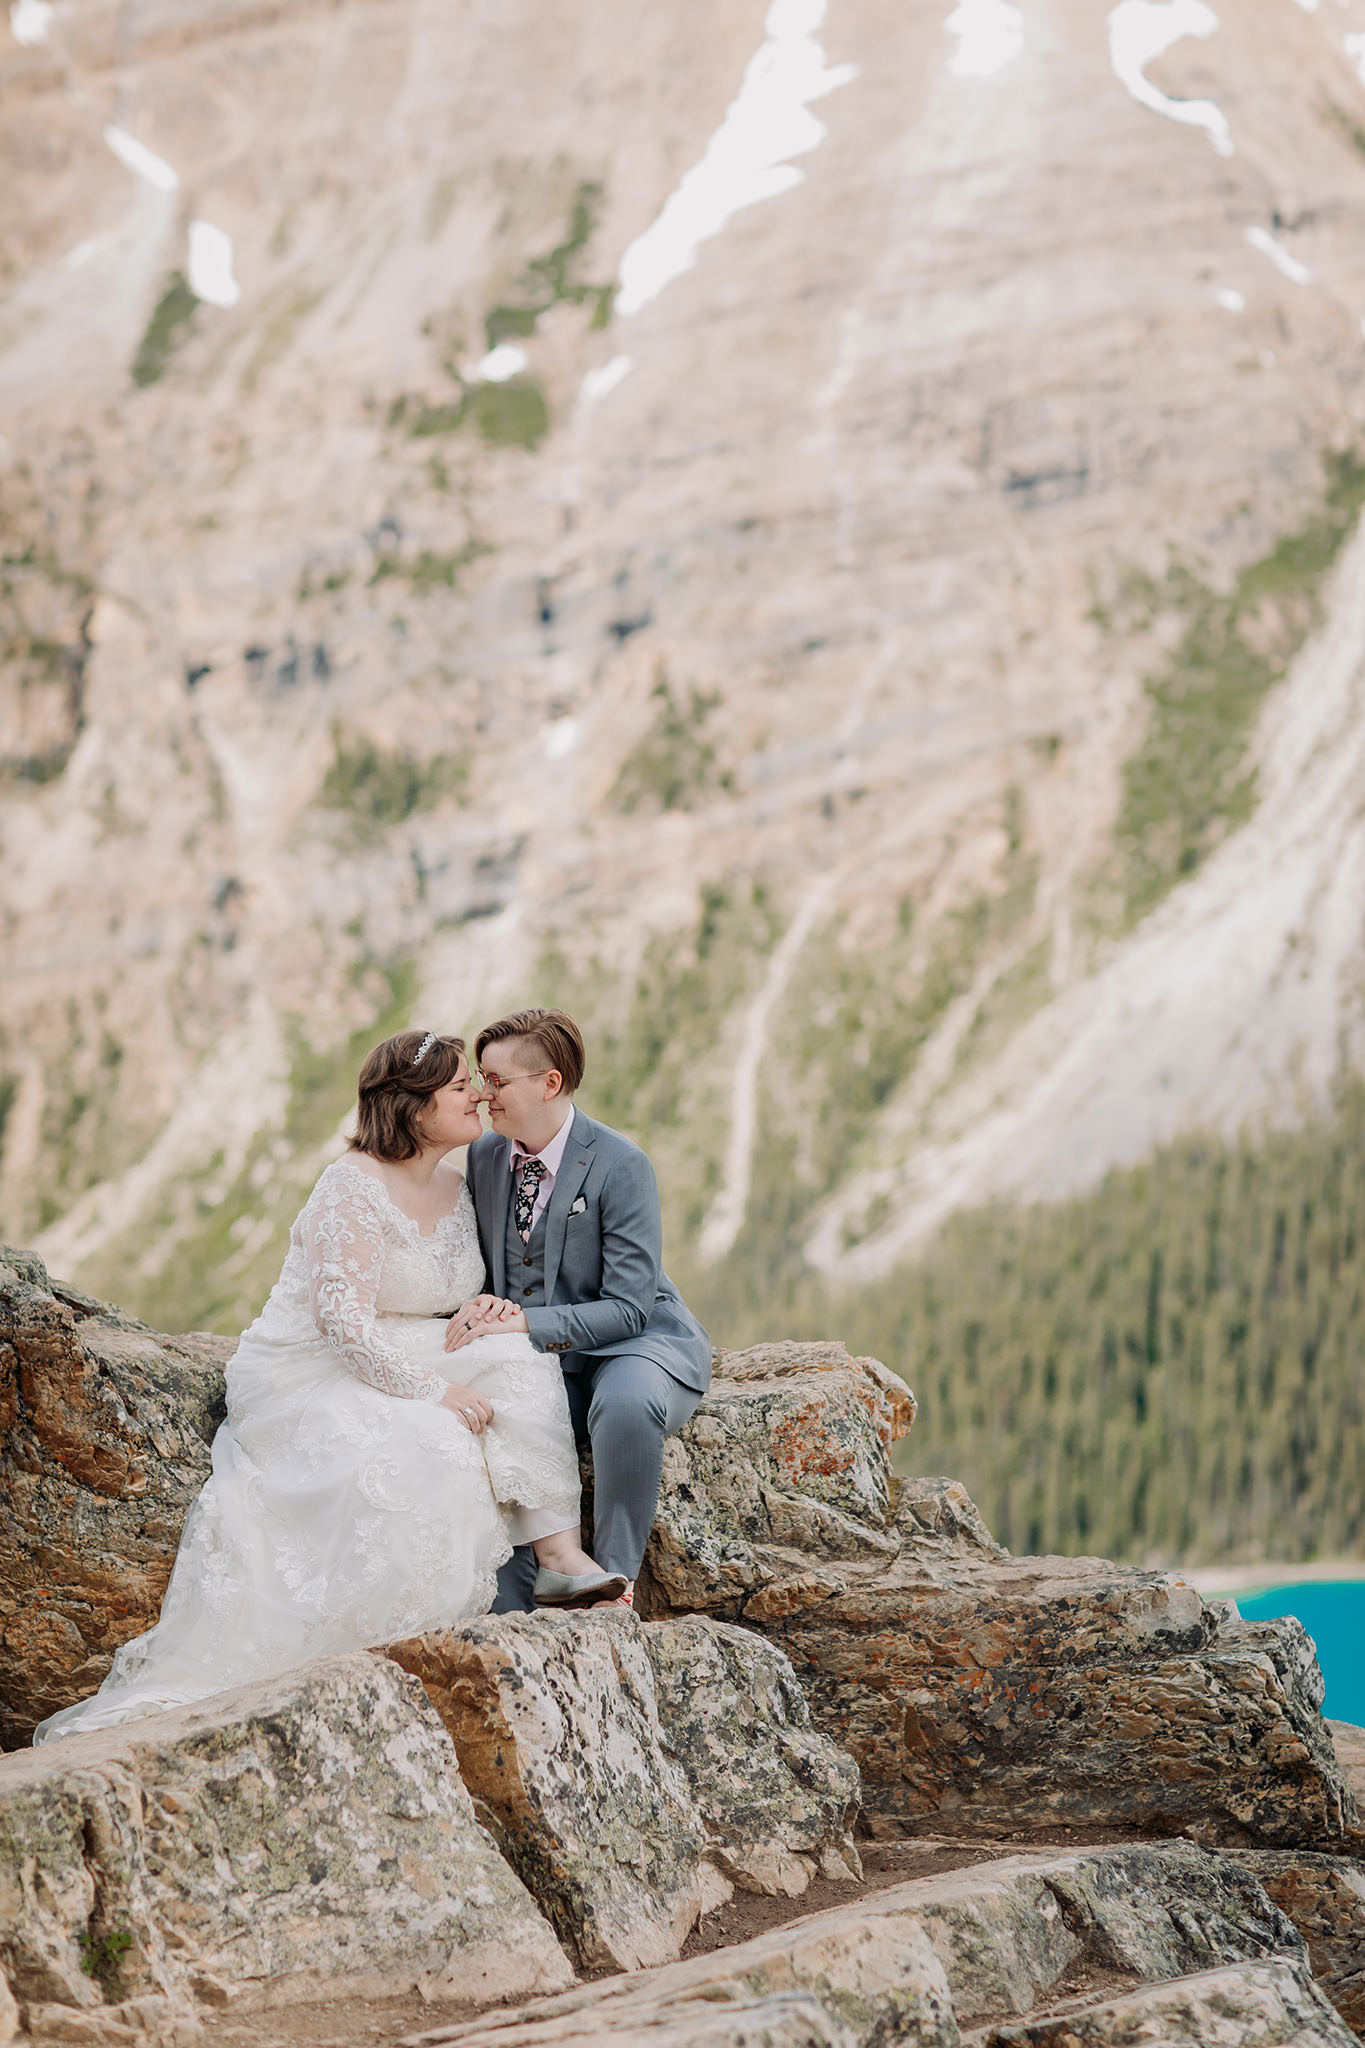 Post-wedding portraits rocky viewpoint at Peyto Lake. same-sex wedding. Mountain Wedding portraits photographed by ENV Photography. Gay friendly. LGBTQ friendly wedding & elopement photographer.